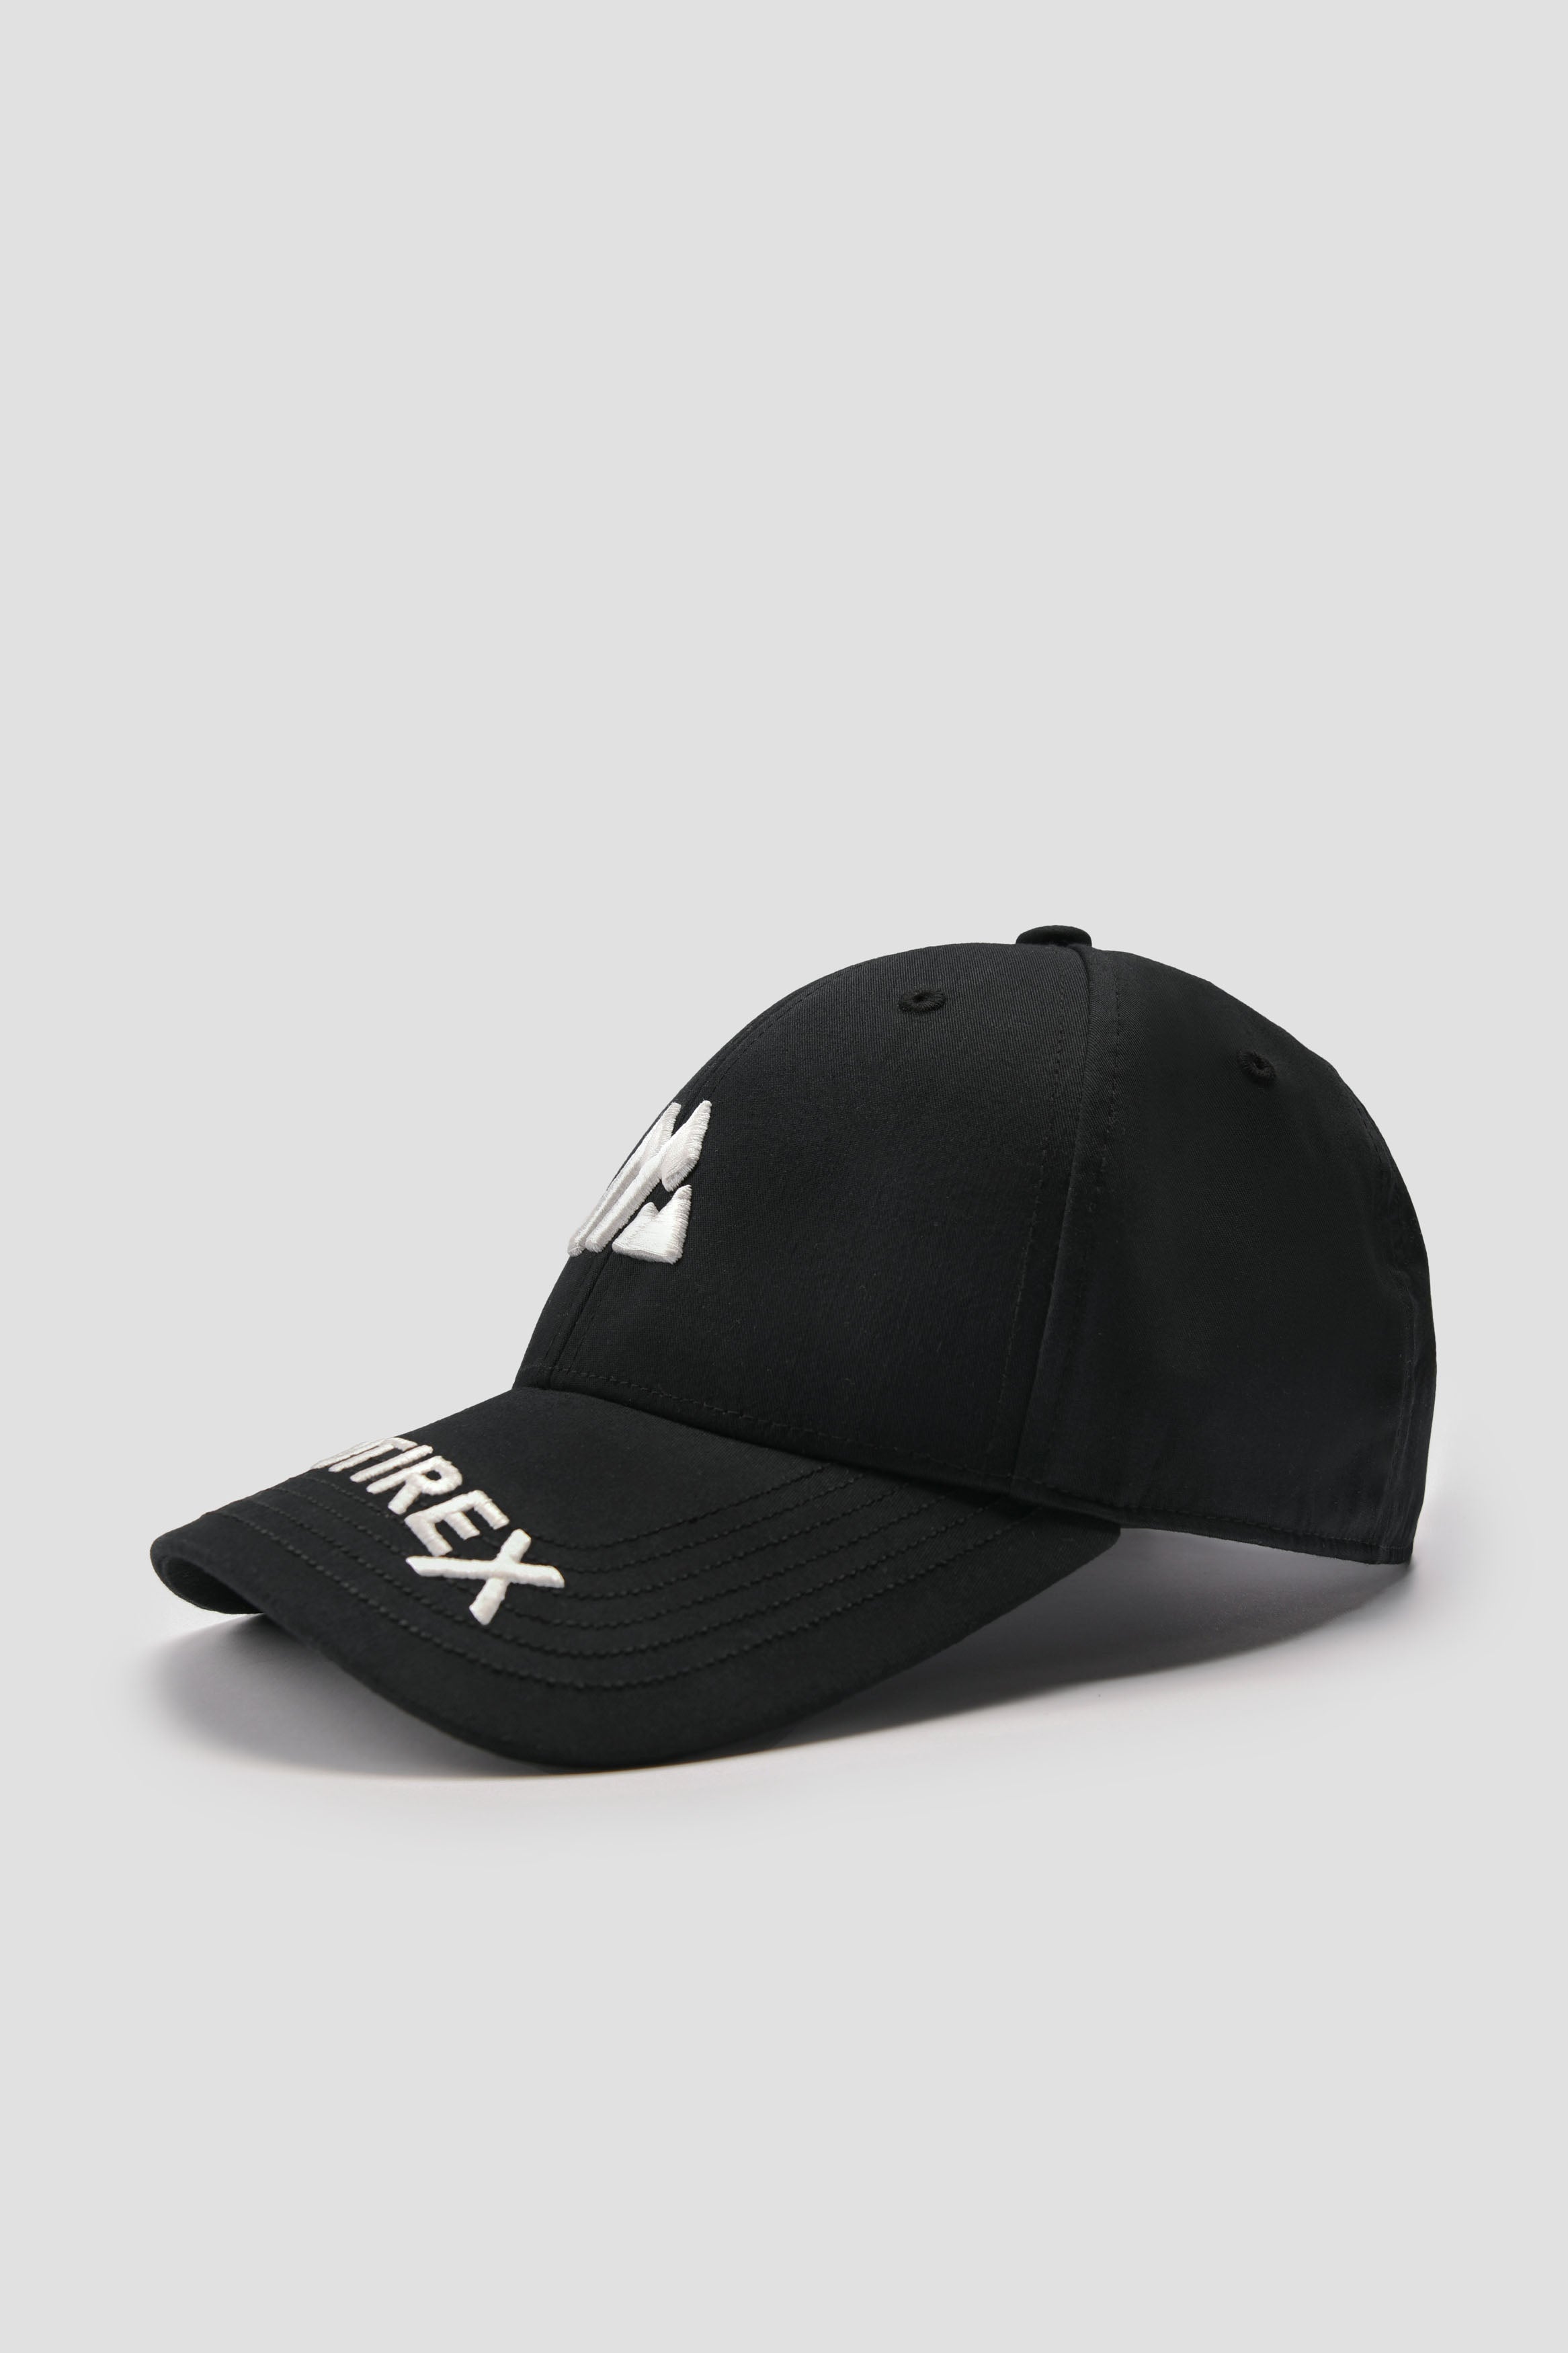 Luxury Designer Canvas Montirex Bucket Hat With Reversible Straps For Men  And Women Perfect For Summer Fishing And Beach Activities From Pfwbz,  $30.13